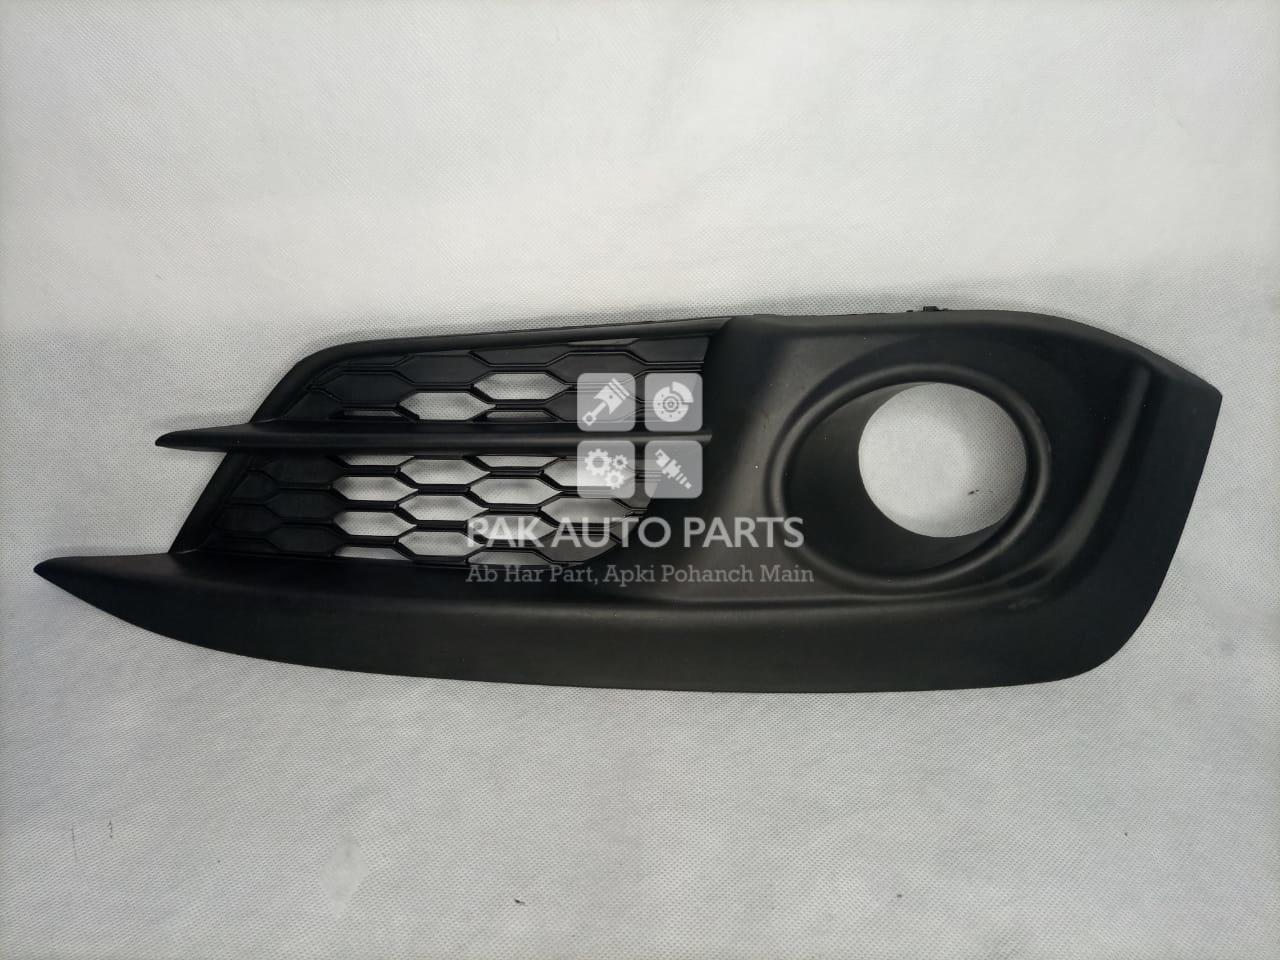 Picture of Honda Civic 2017-21 Front Fog Light Cover